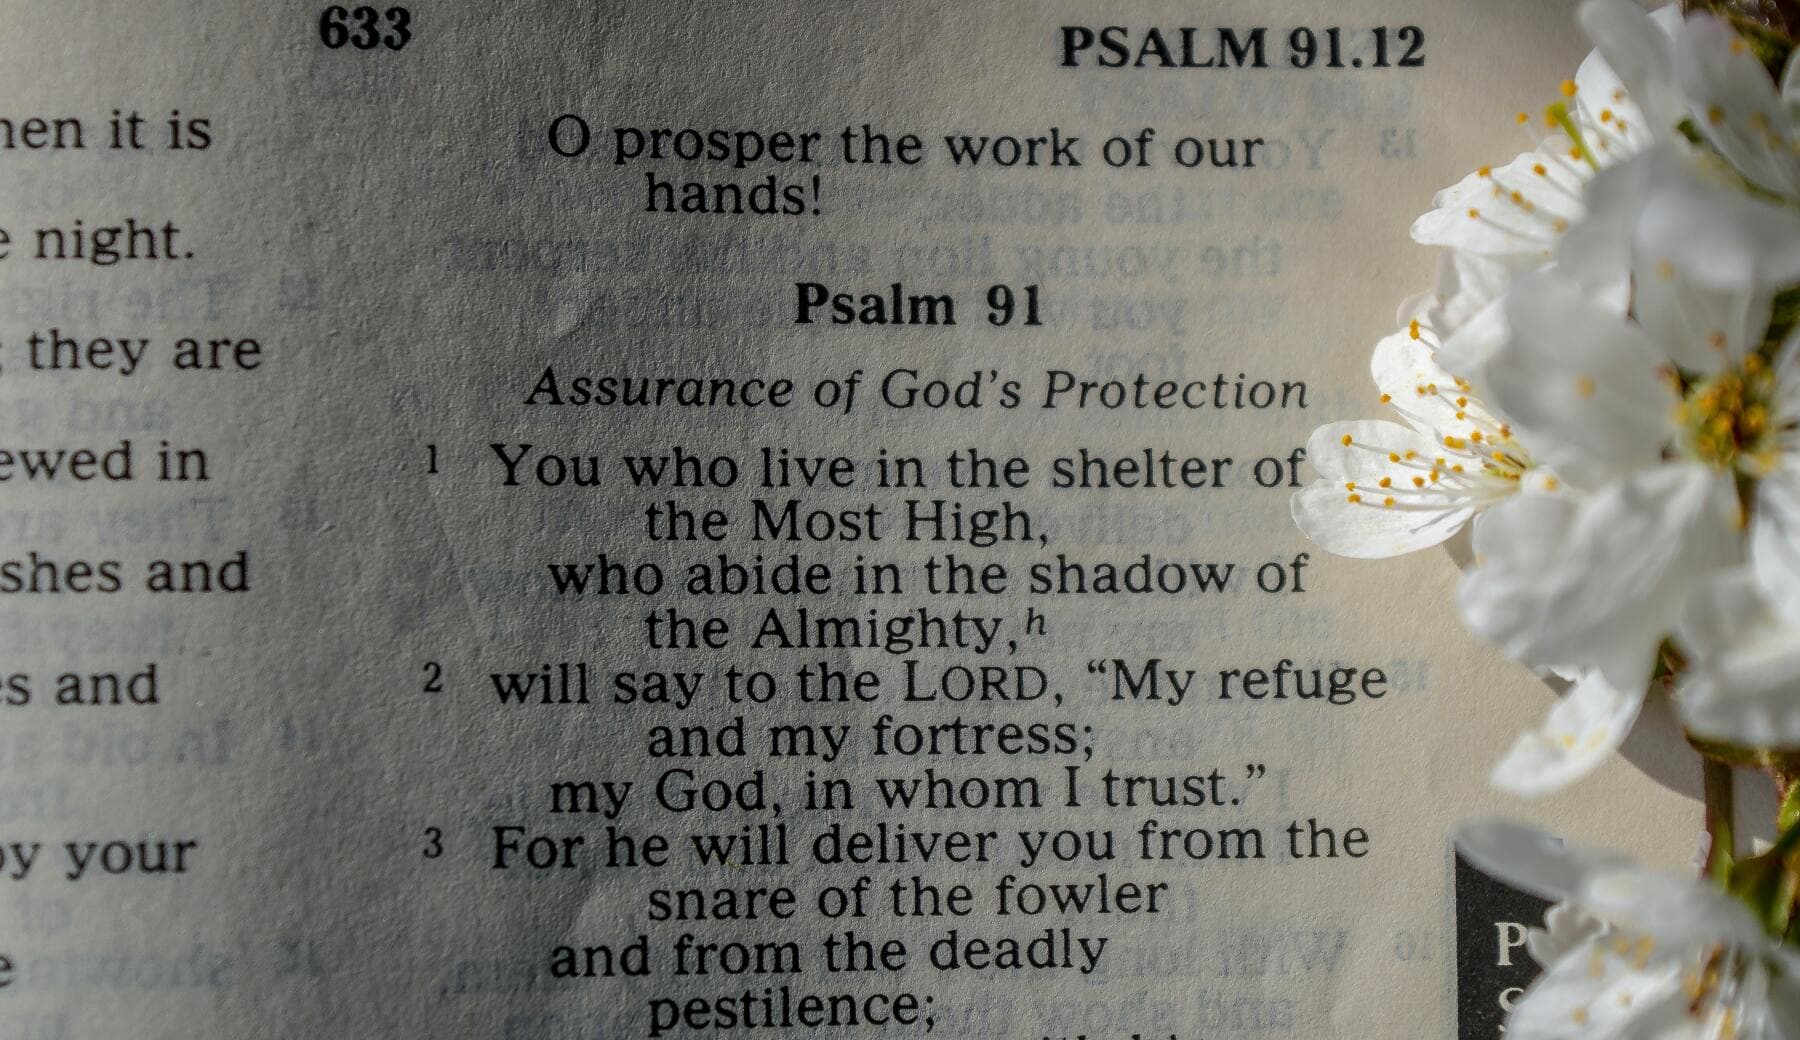 A Prayer for Protection